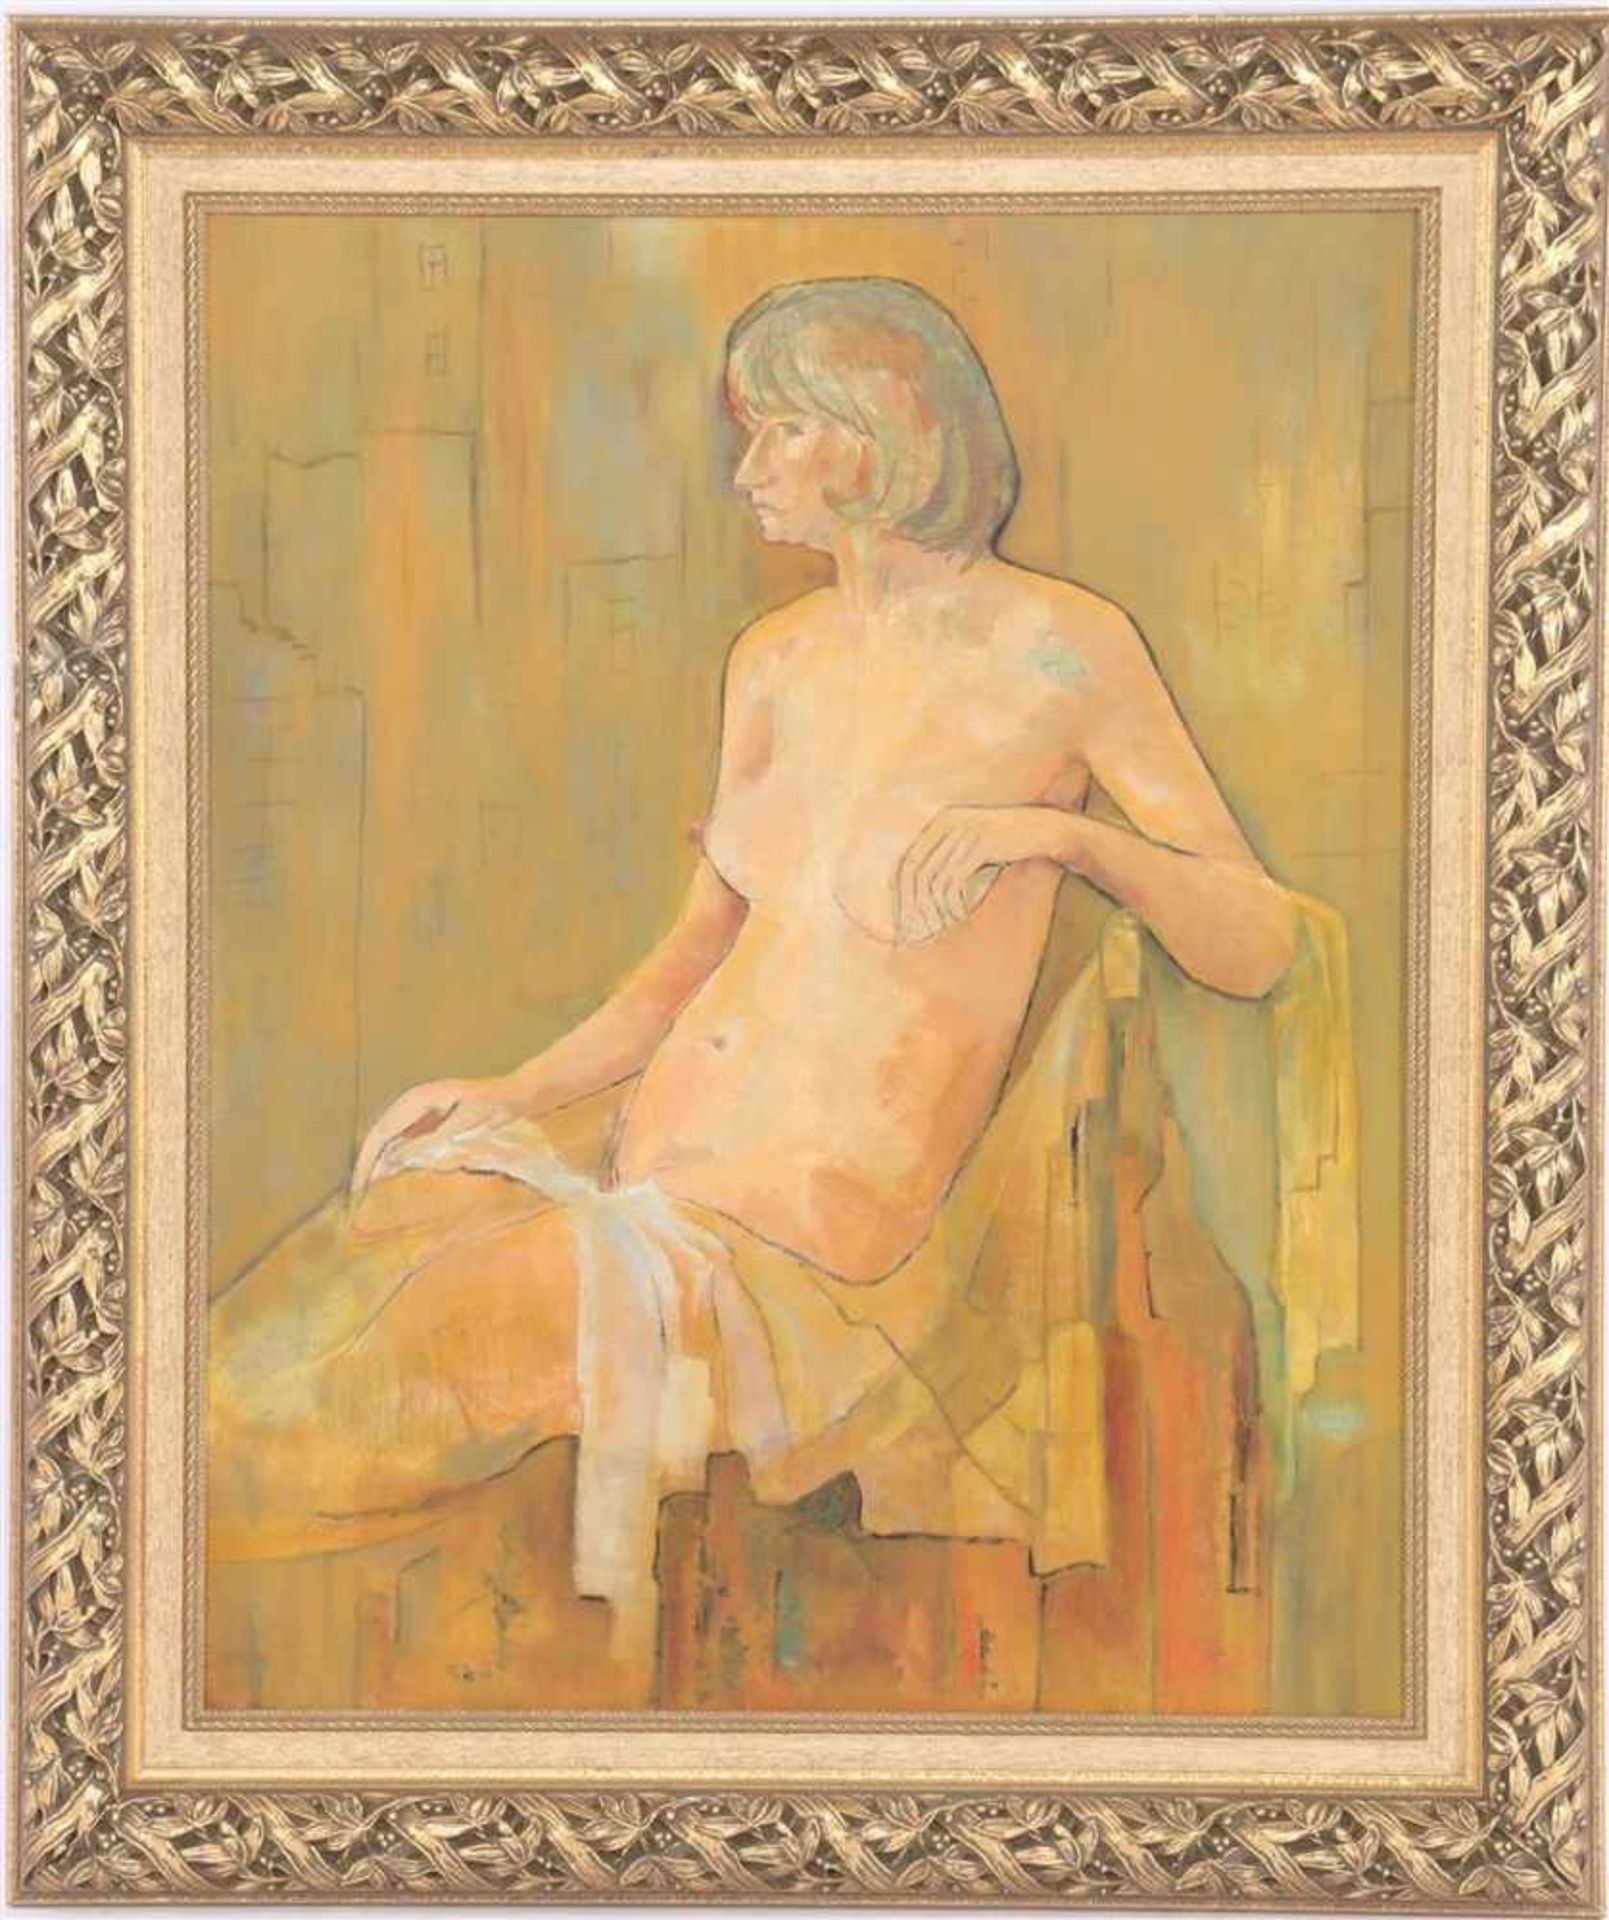 Signed A Melaerts, Posing nude, canvas dated 1976, 100x80 cm, outer size 124x104 cm